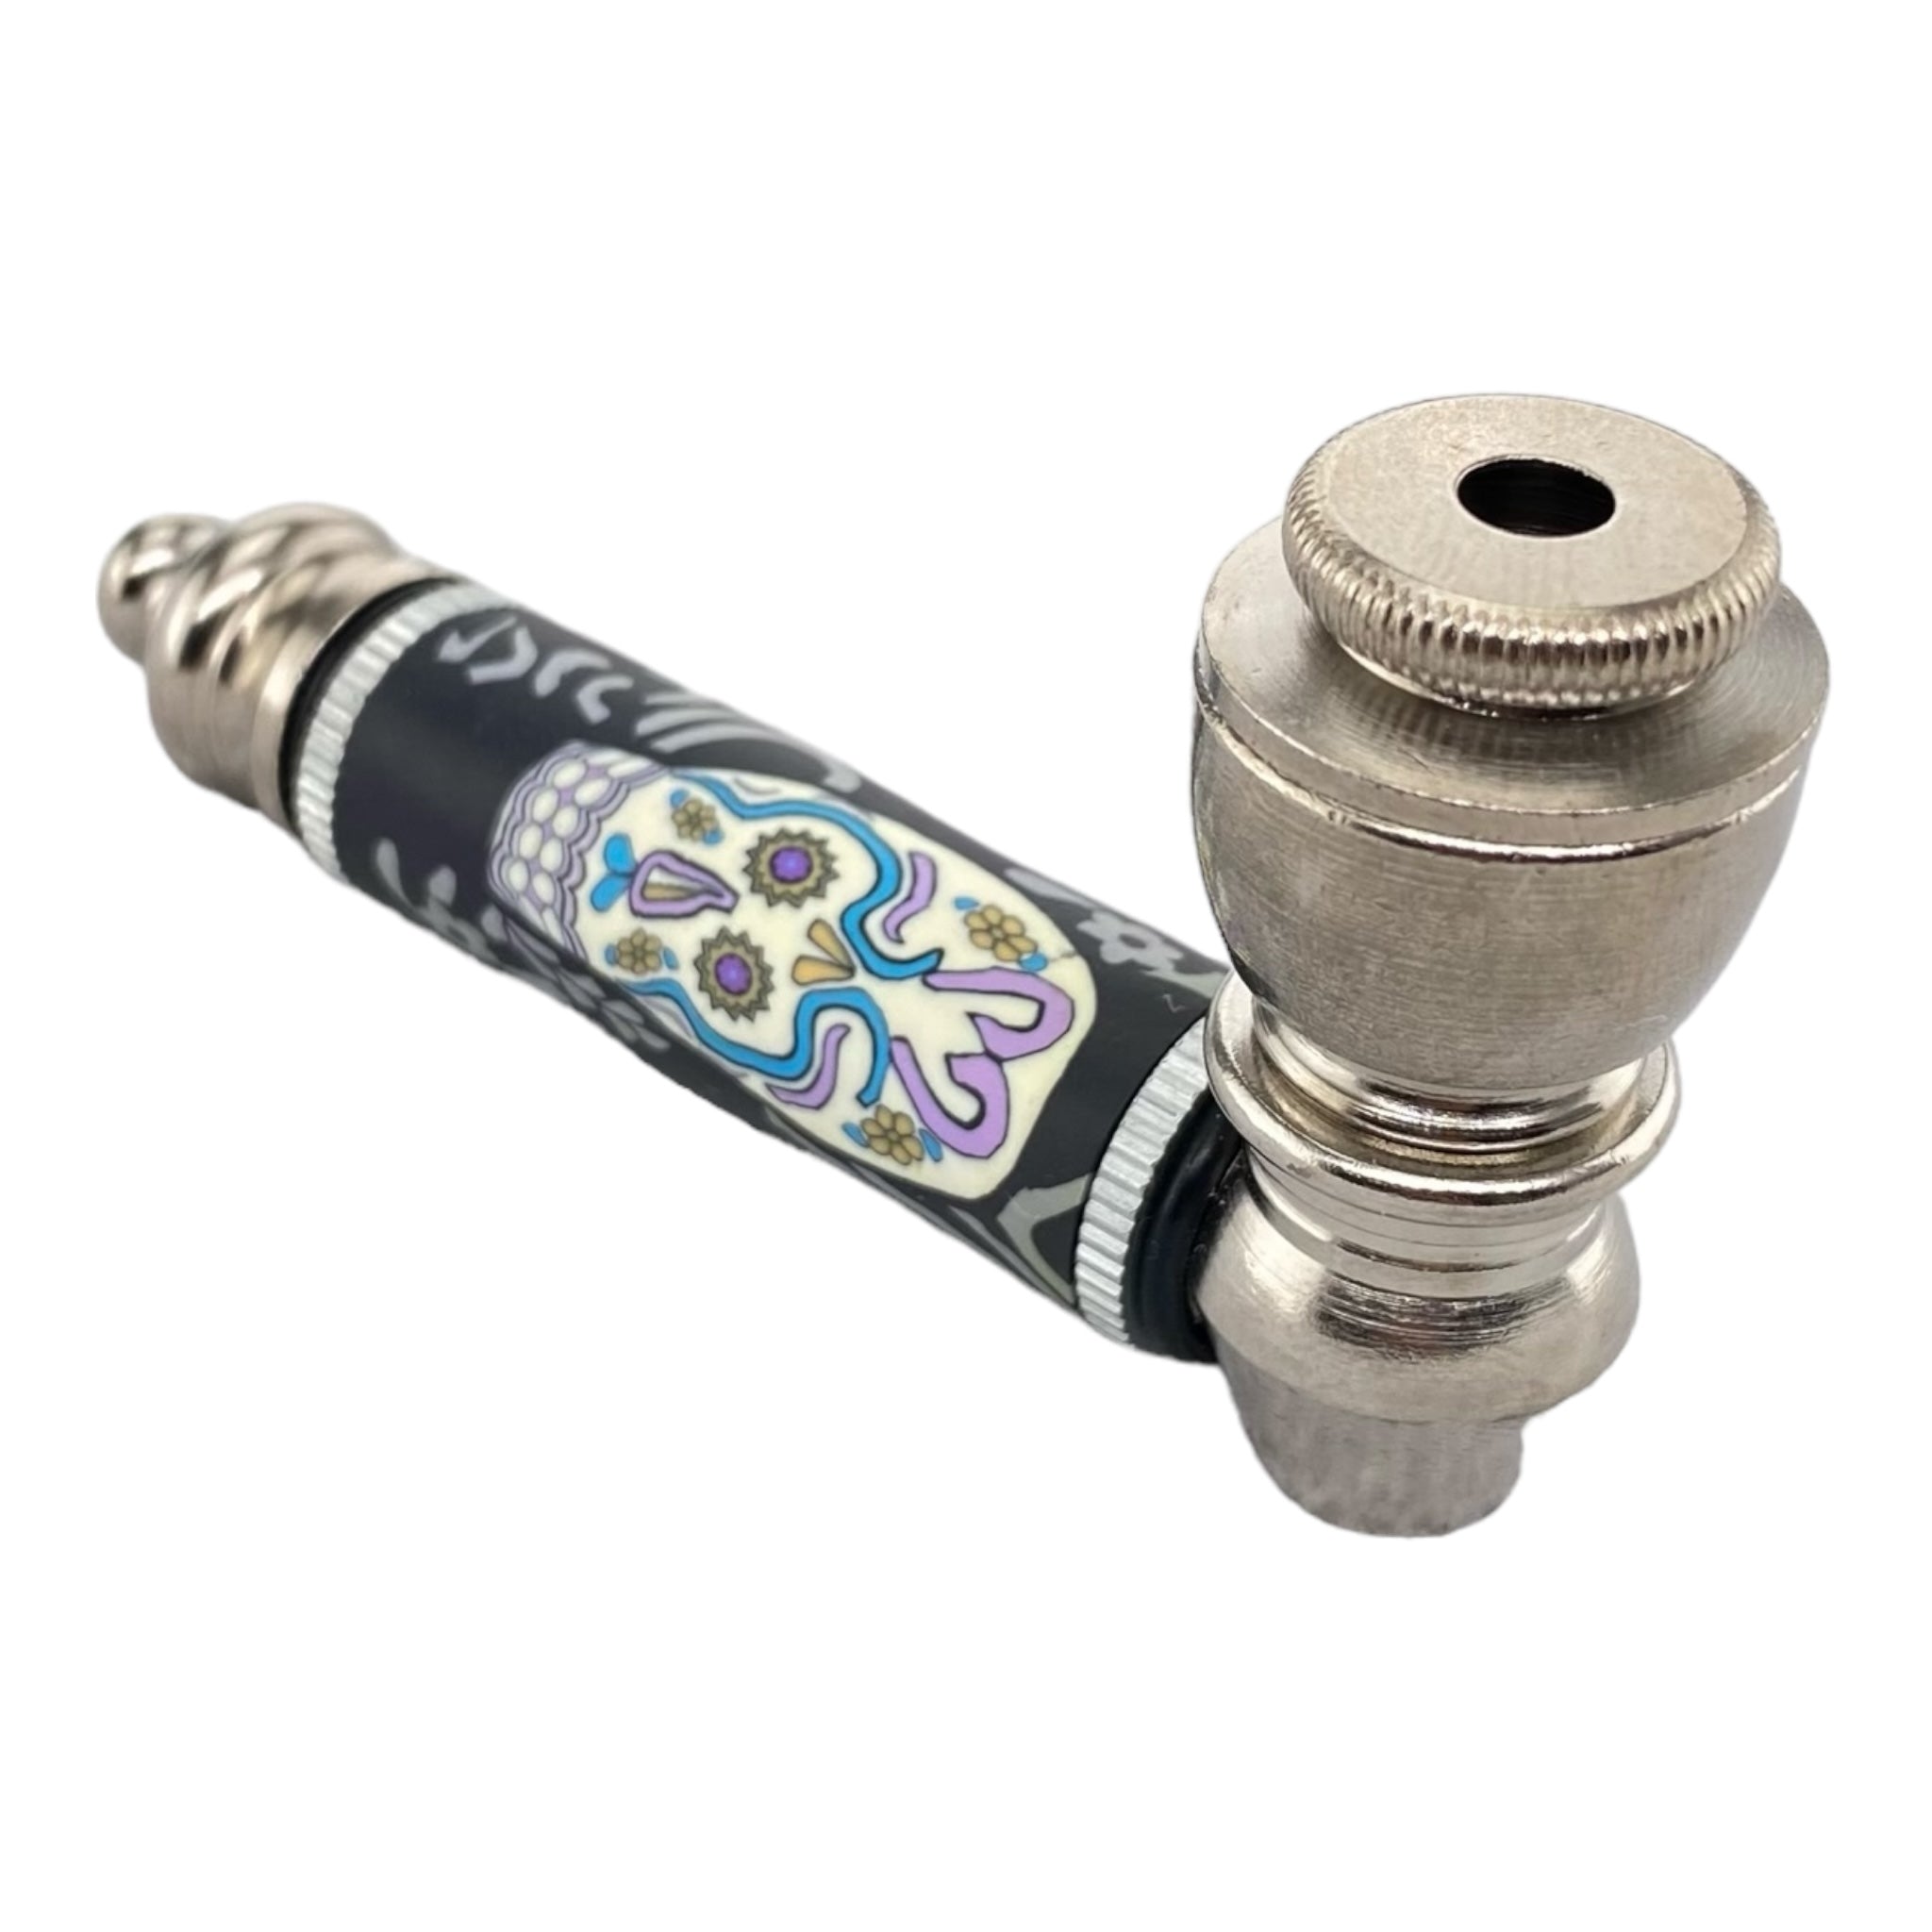 Metal Hand Pipes - Silver And Black Hand Pipe With Purple Candy Skull